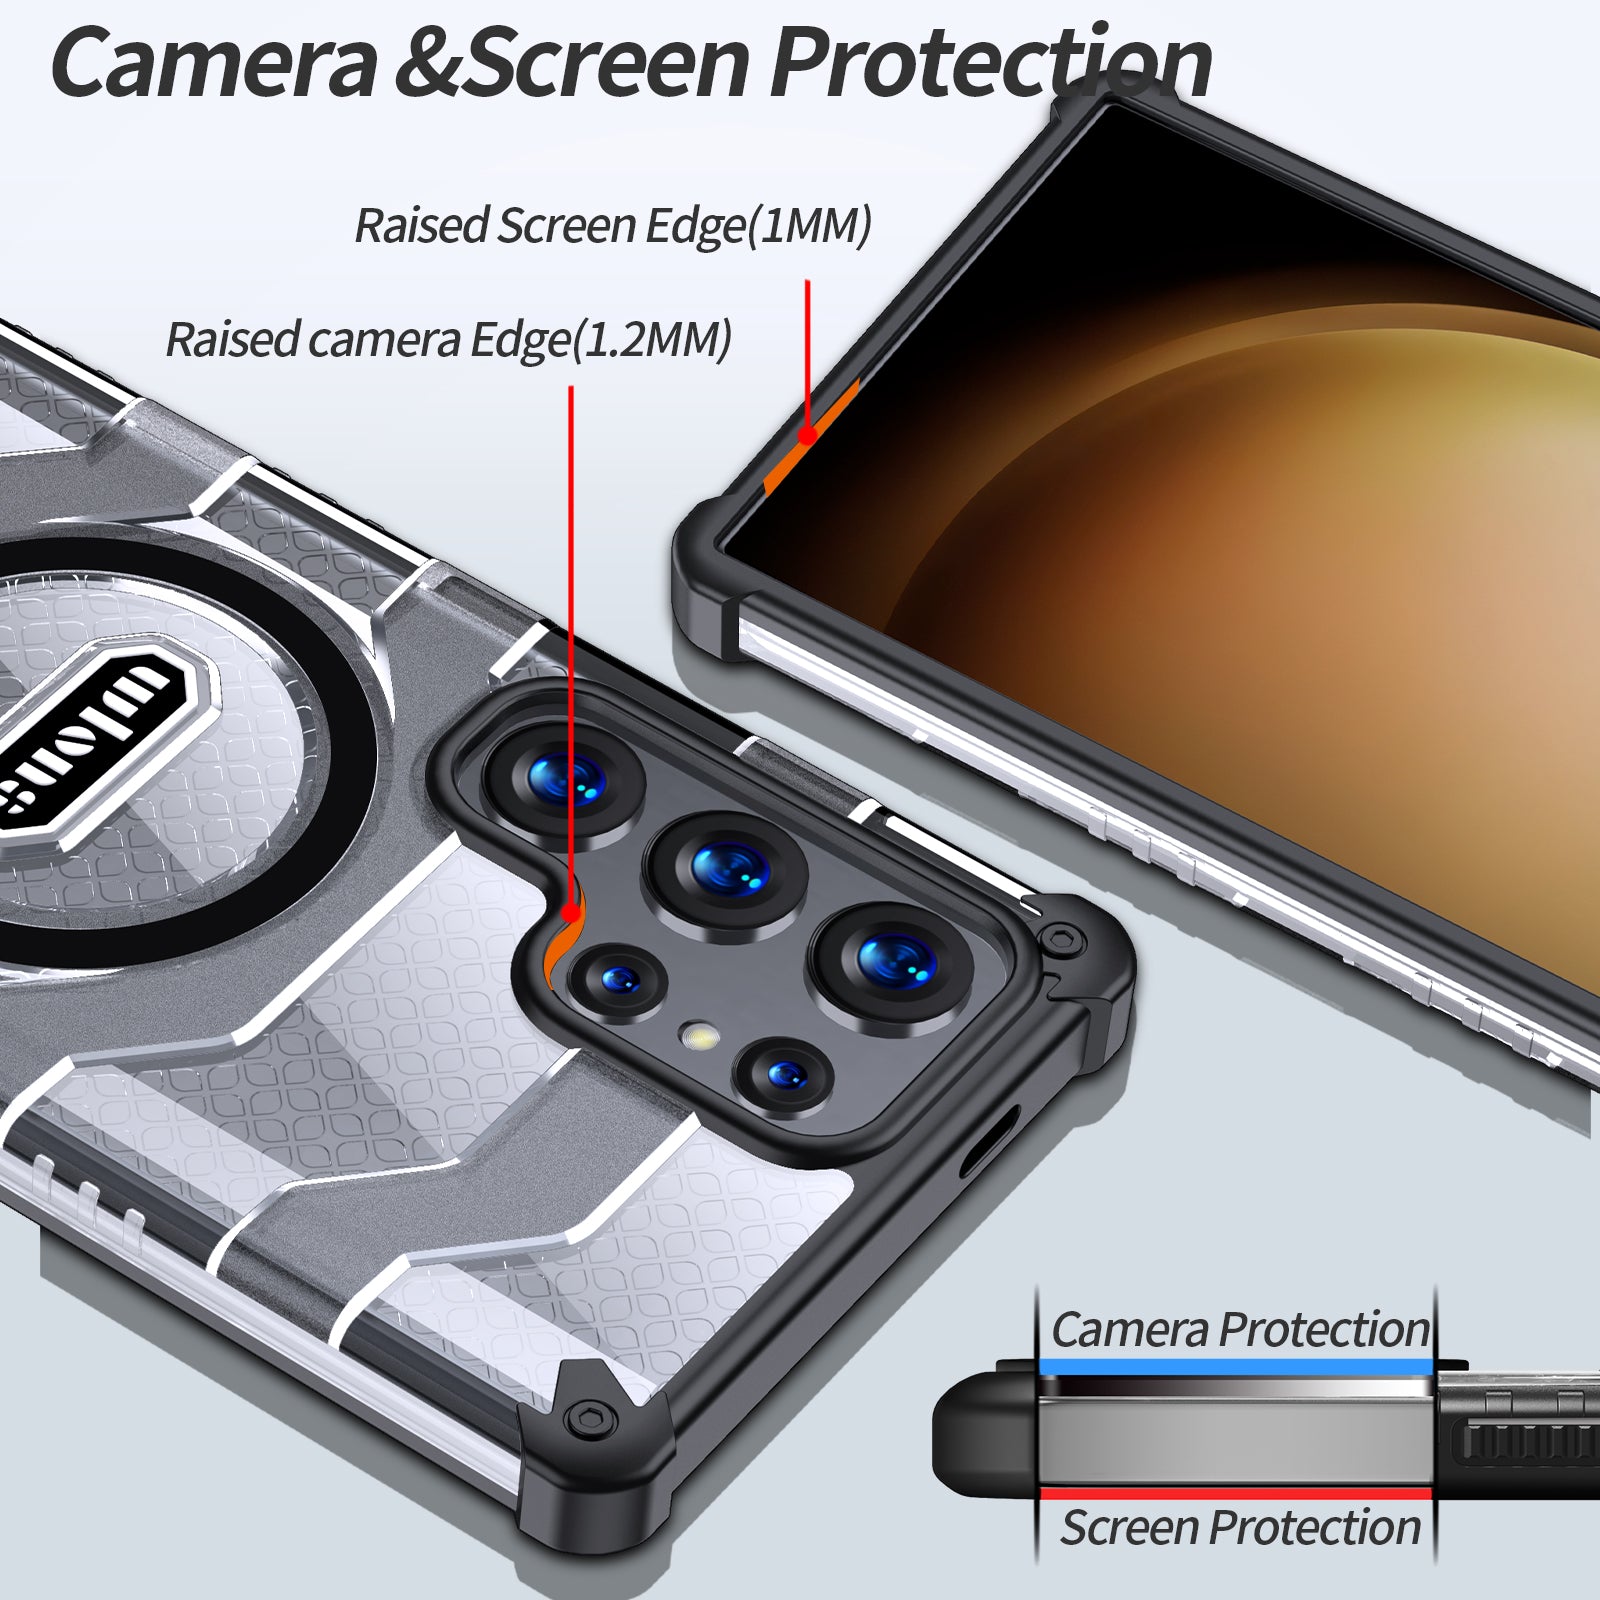 Samsung S24 Ultra Screen Protection Case - Camera Protection 